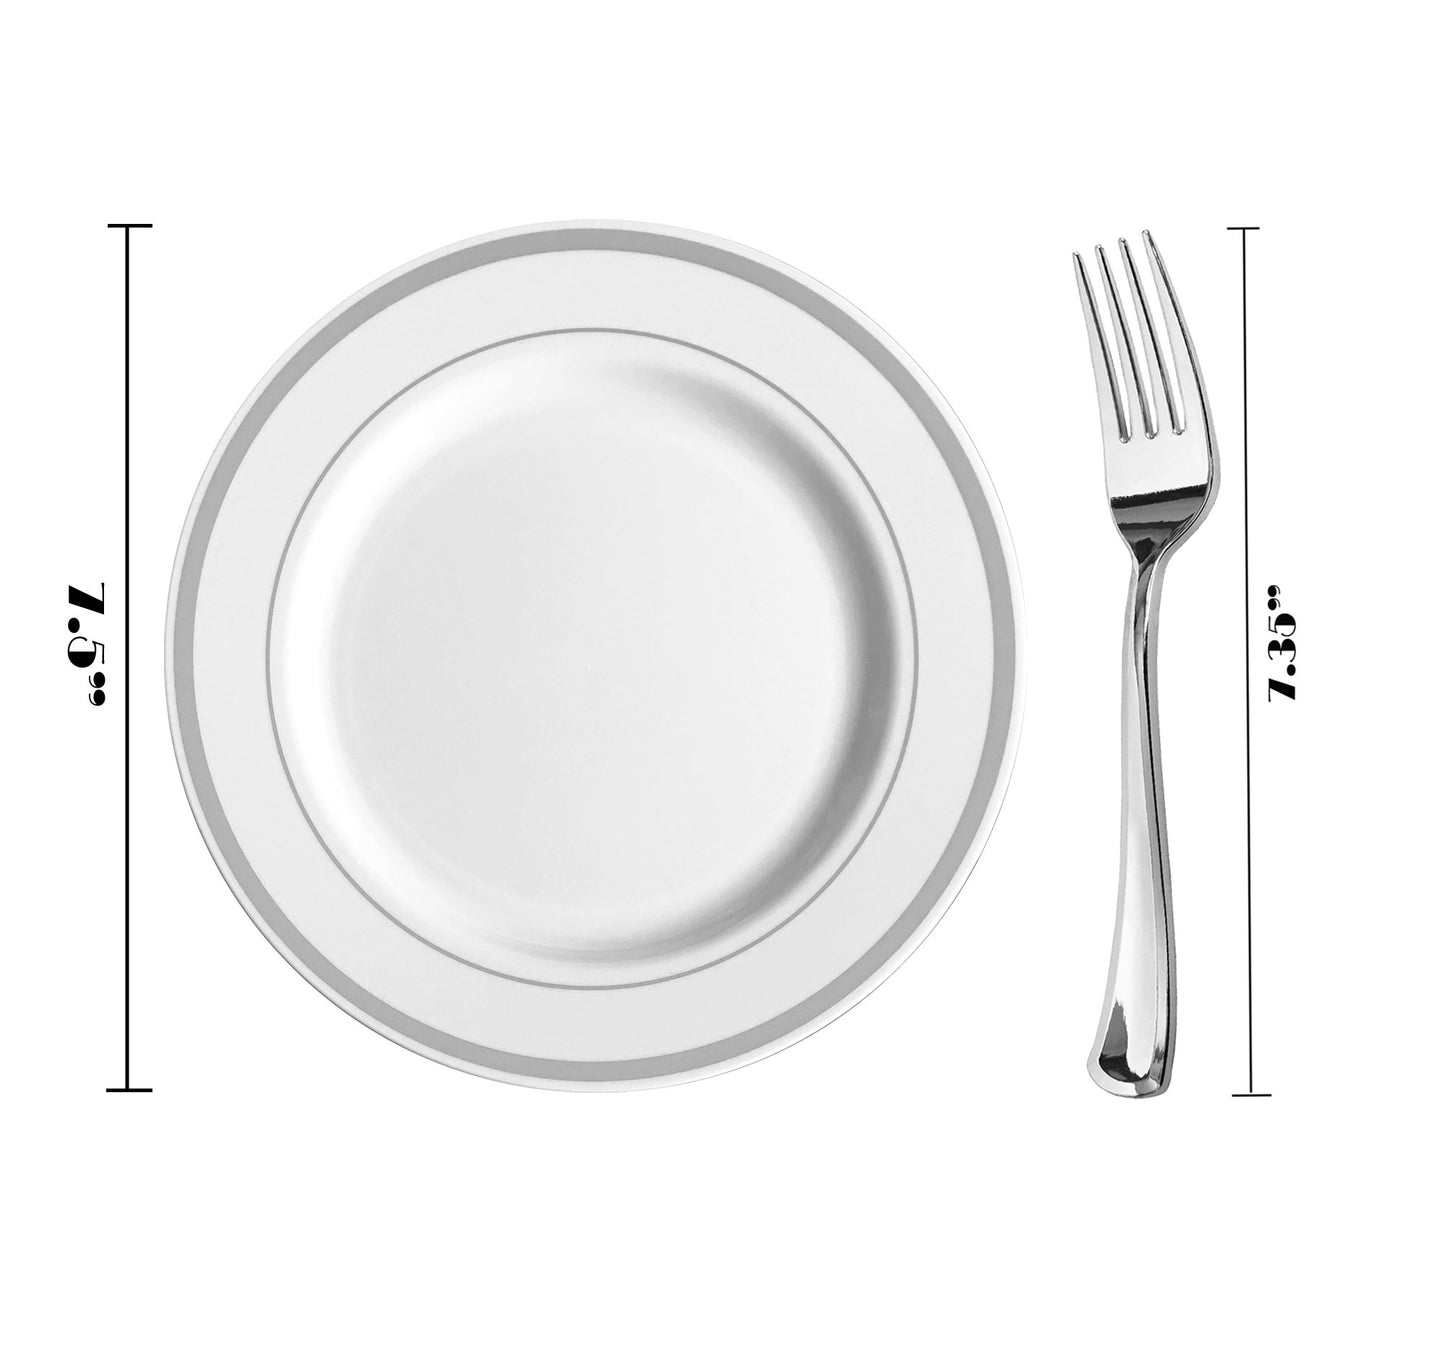 JL Prime 50 Pack 25 Silver 7.35 Inch Small Plastic Plates & 25 Forks Set, Heavy Duty Disposable Plastic Plates with Silver Rim & Silverware for Party & Wedding, Salad/Dessert/Cake Plates and Forks